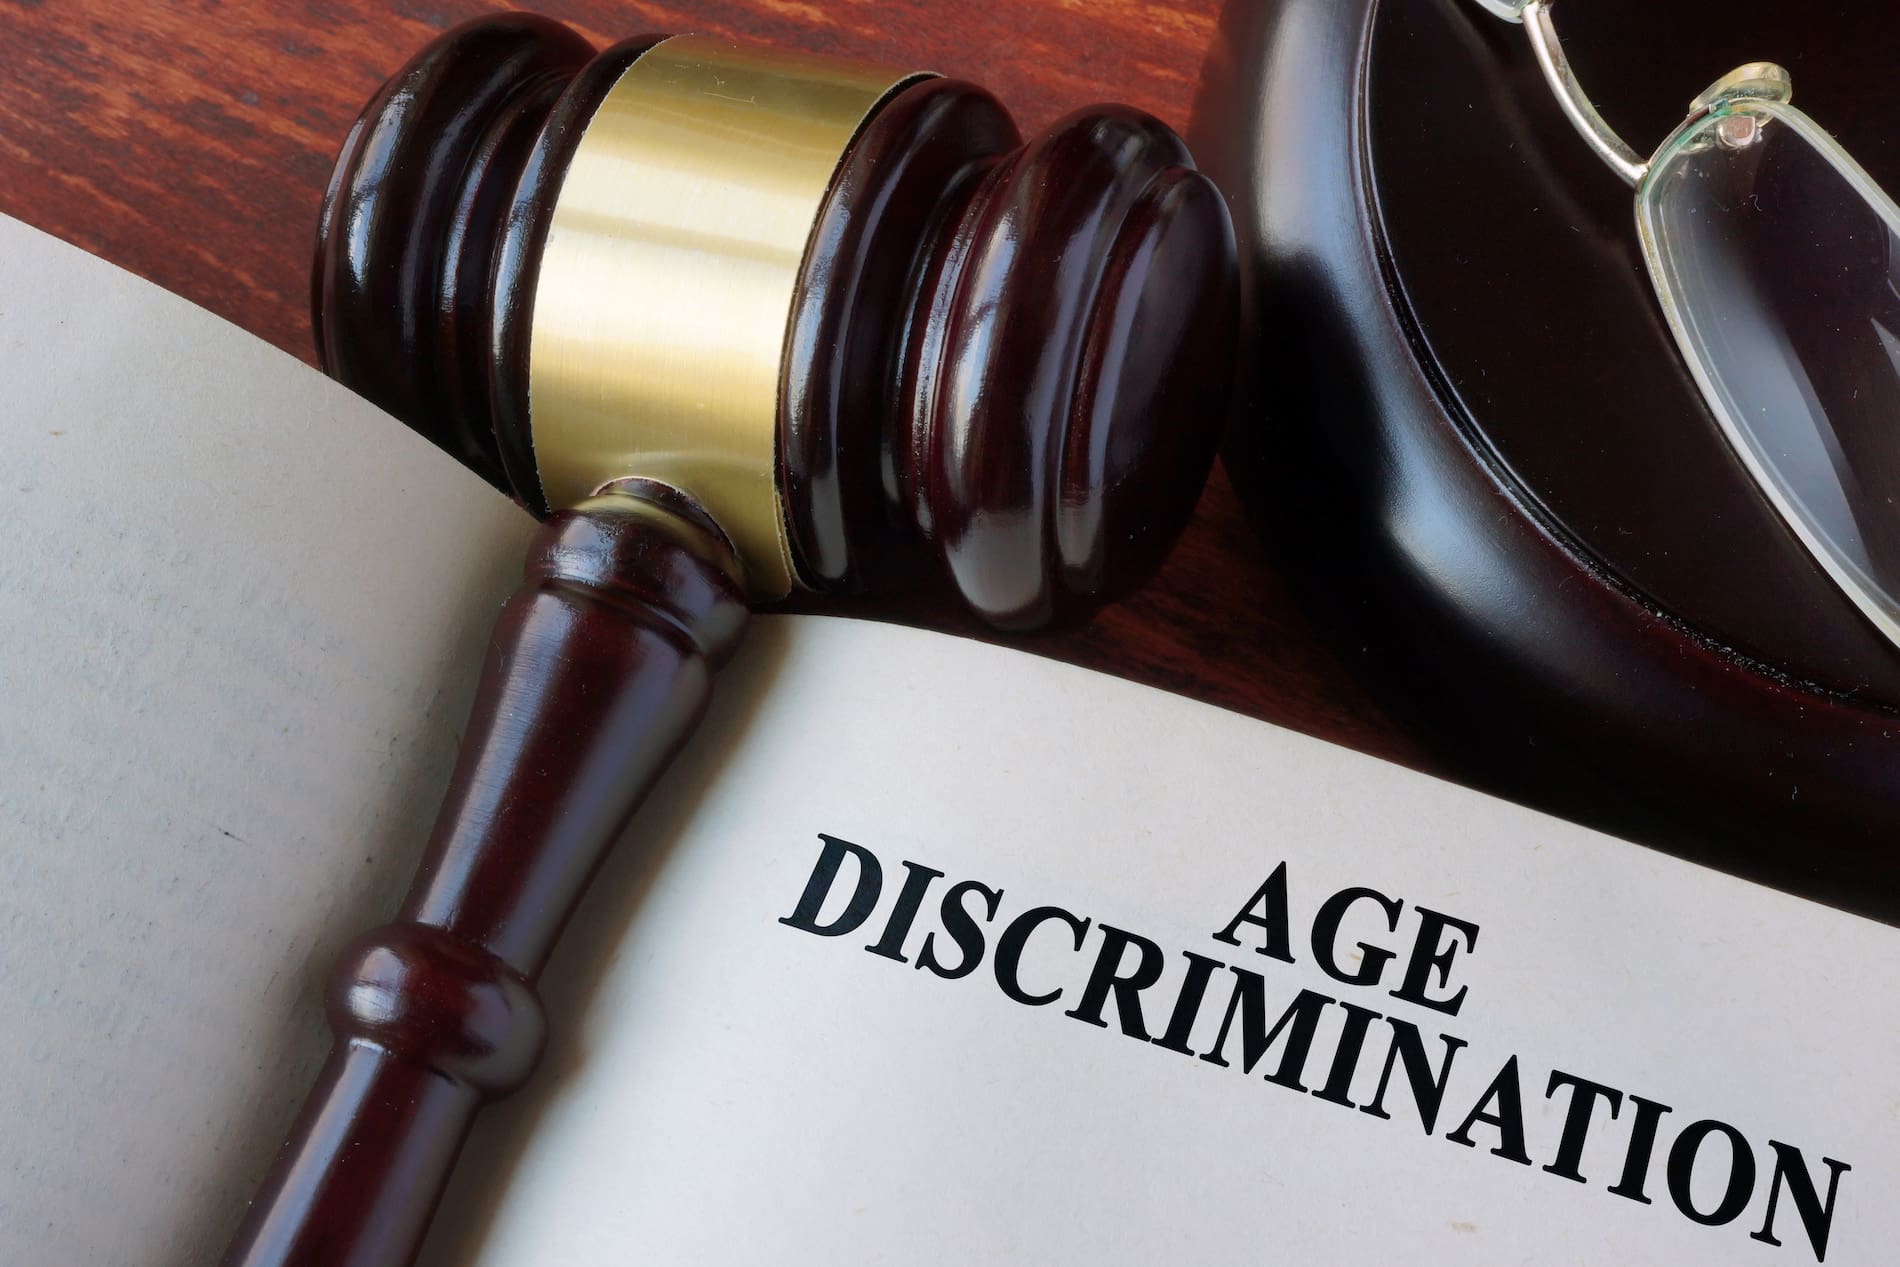 _Age-based discrimination act of 1967